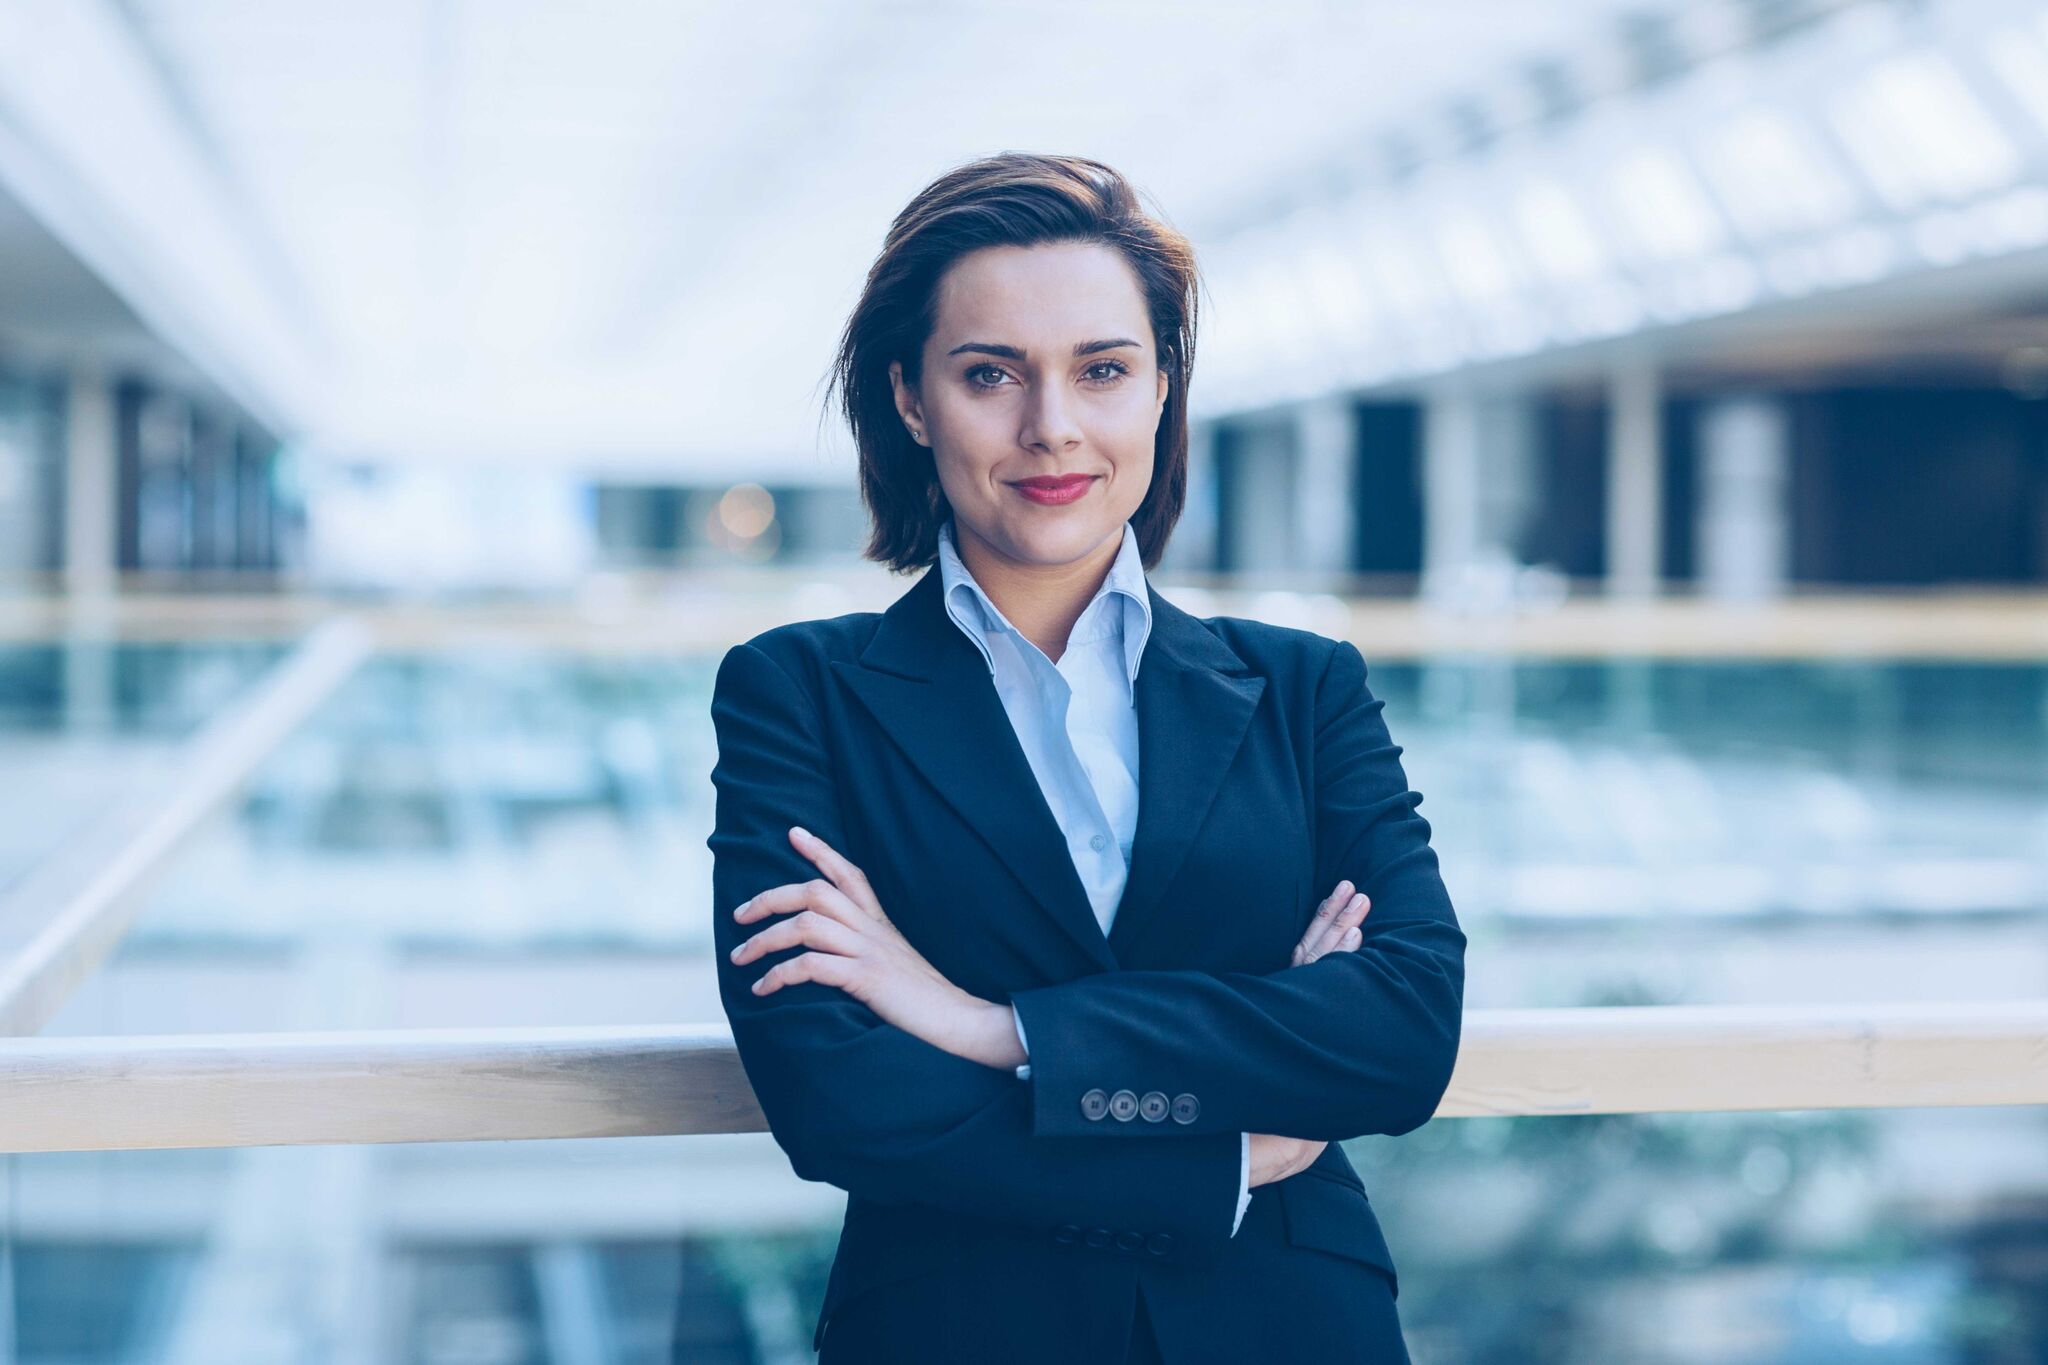 Young woman in business wear standing with armes crossed in business environment, with copy space.